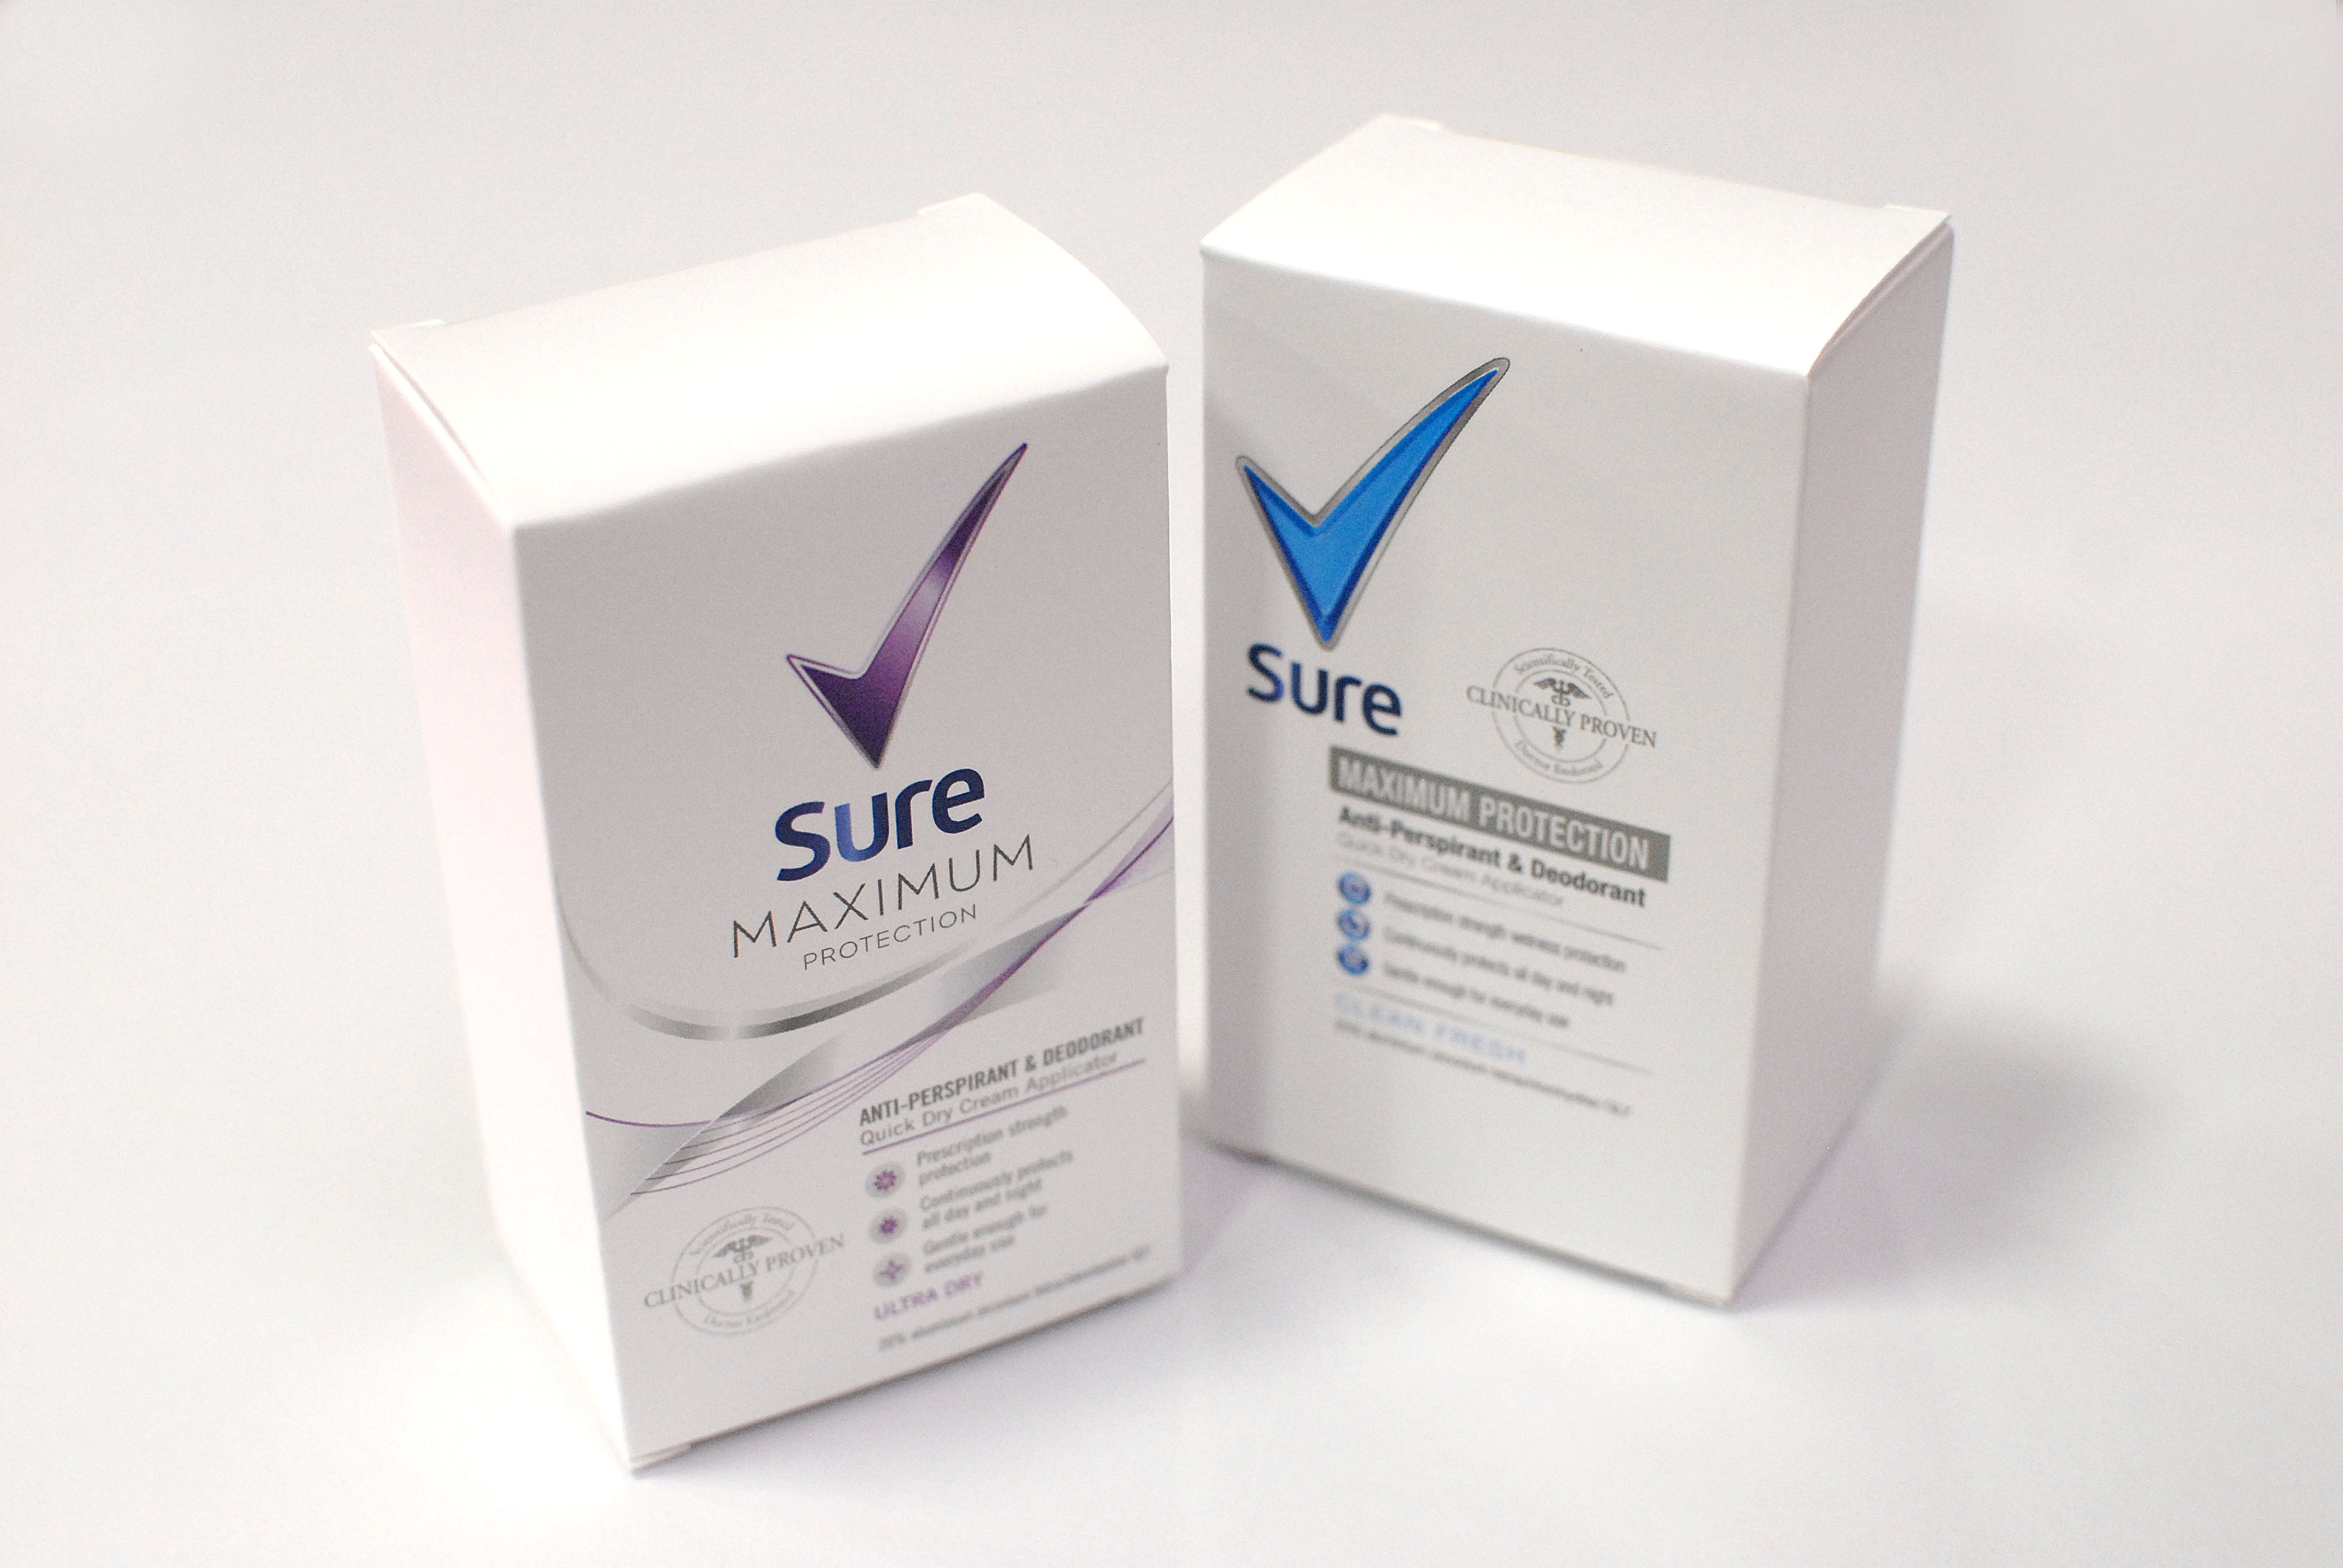 Two boxes of Sure deodorant are a perfect example of digital print branding